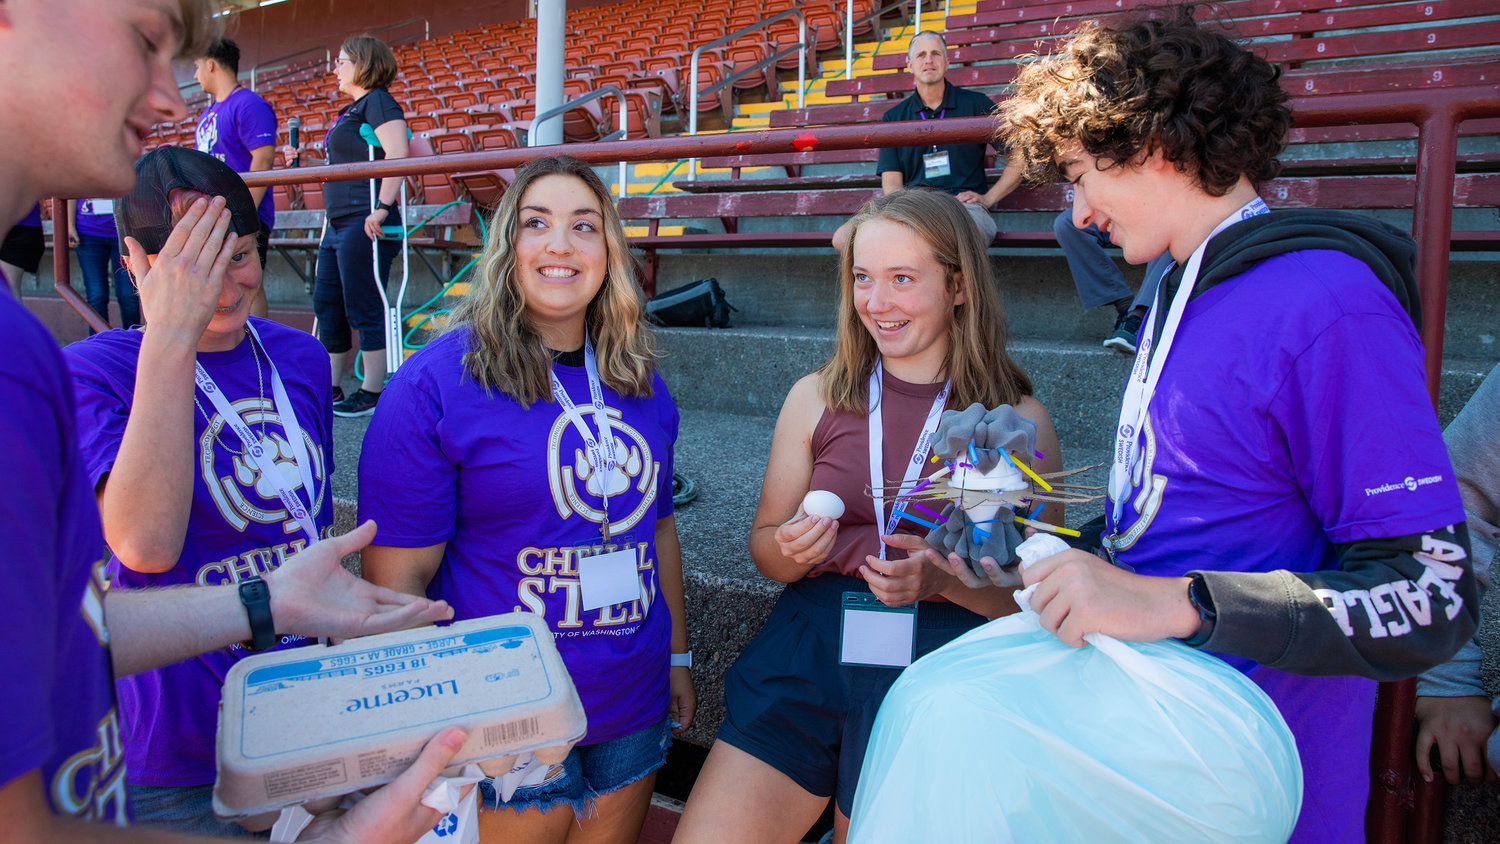 Lillian Hueffed, a W.F. West High School STEM student, receives her egg alongside partners who helped create a device to protect the shell from cracking during a drop Tuesday in Chehalis.